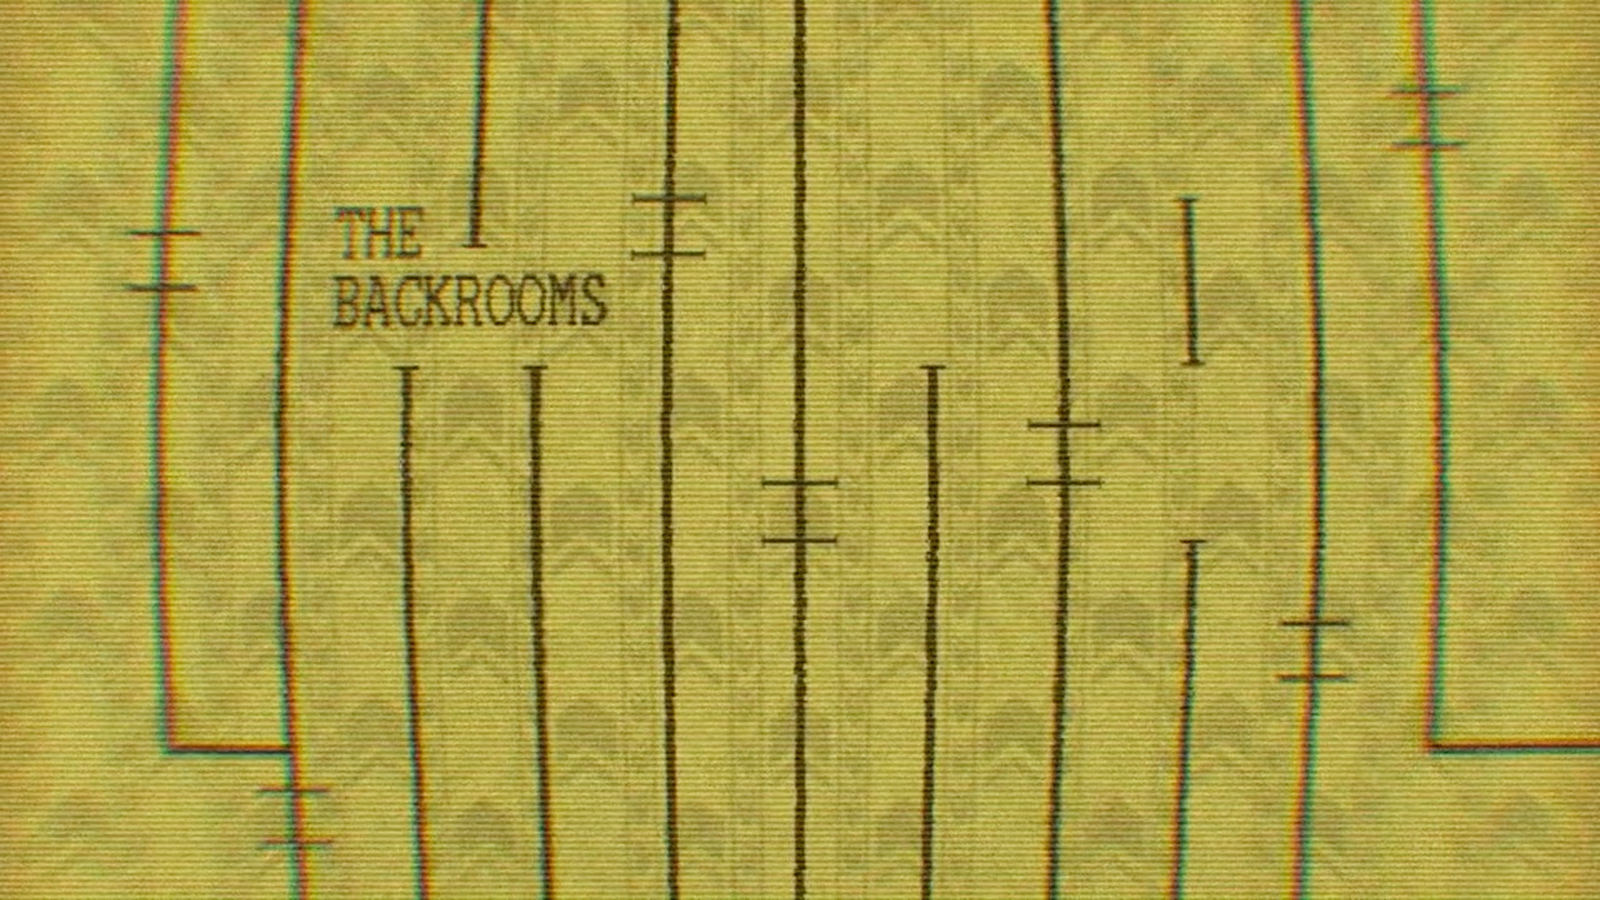 The Eternal Repository - The Backrooms